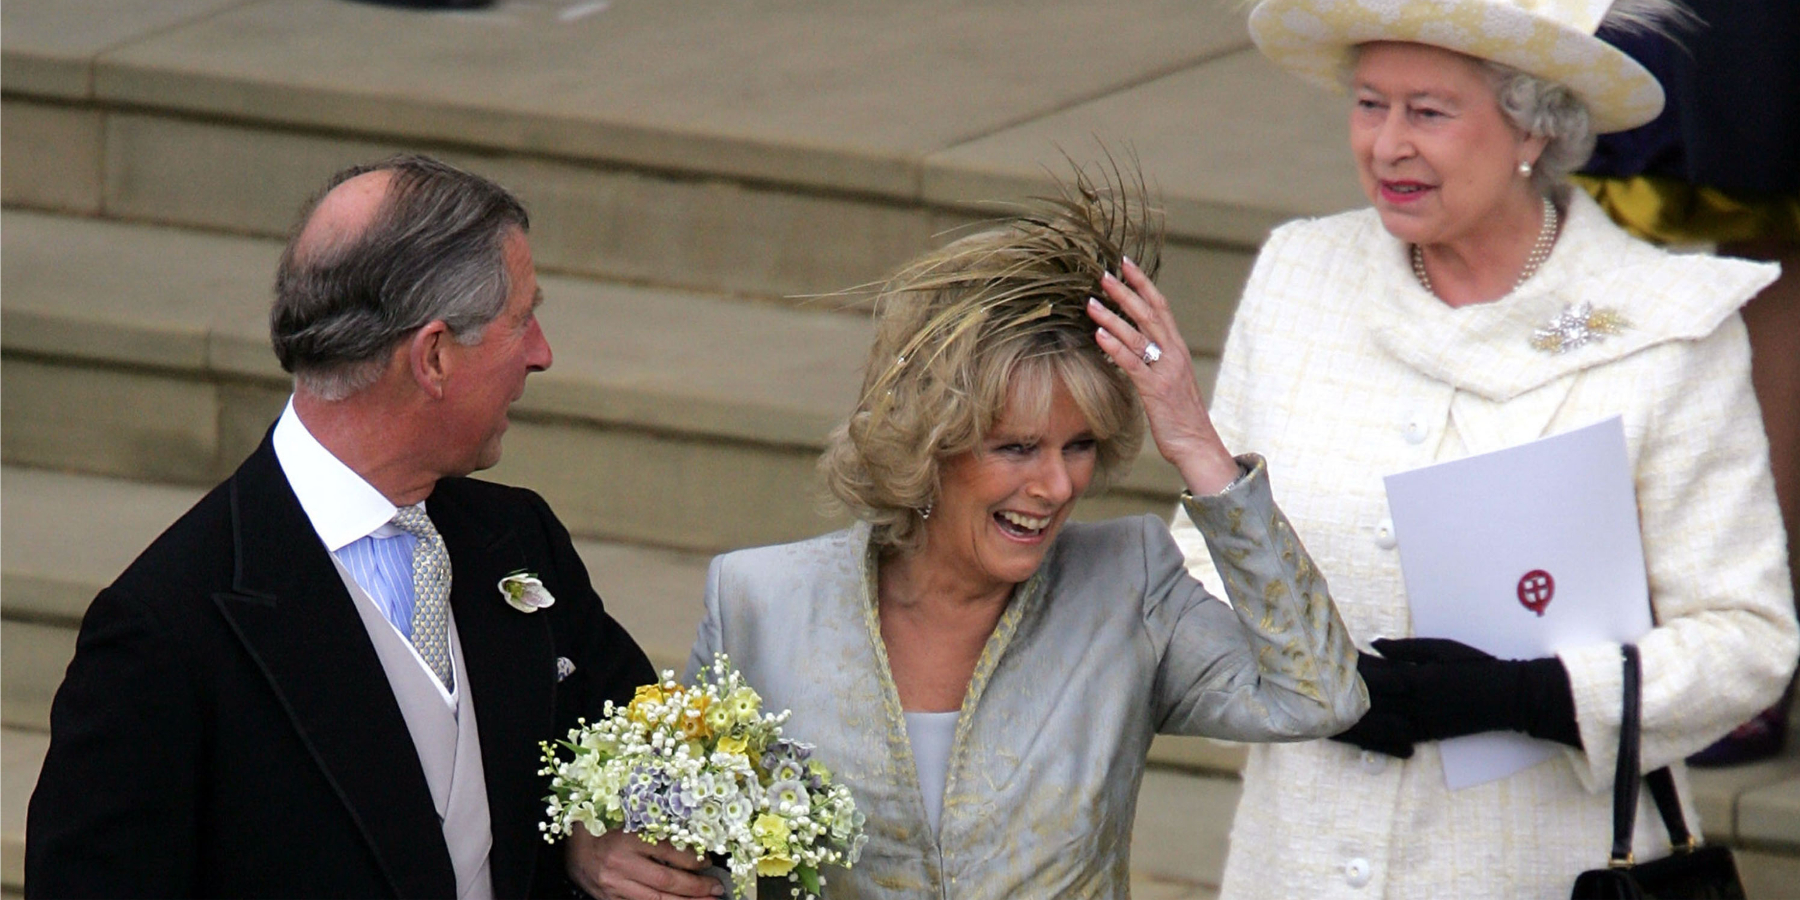 King Charles III, Camilla Parker Bowles, and Queen Elizabeth II on the couple's 2005 wedding day.